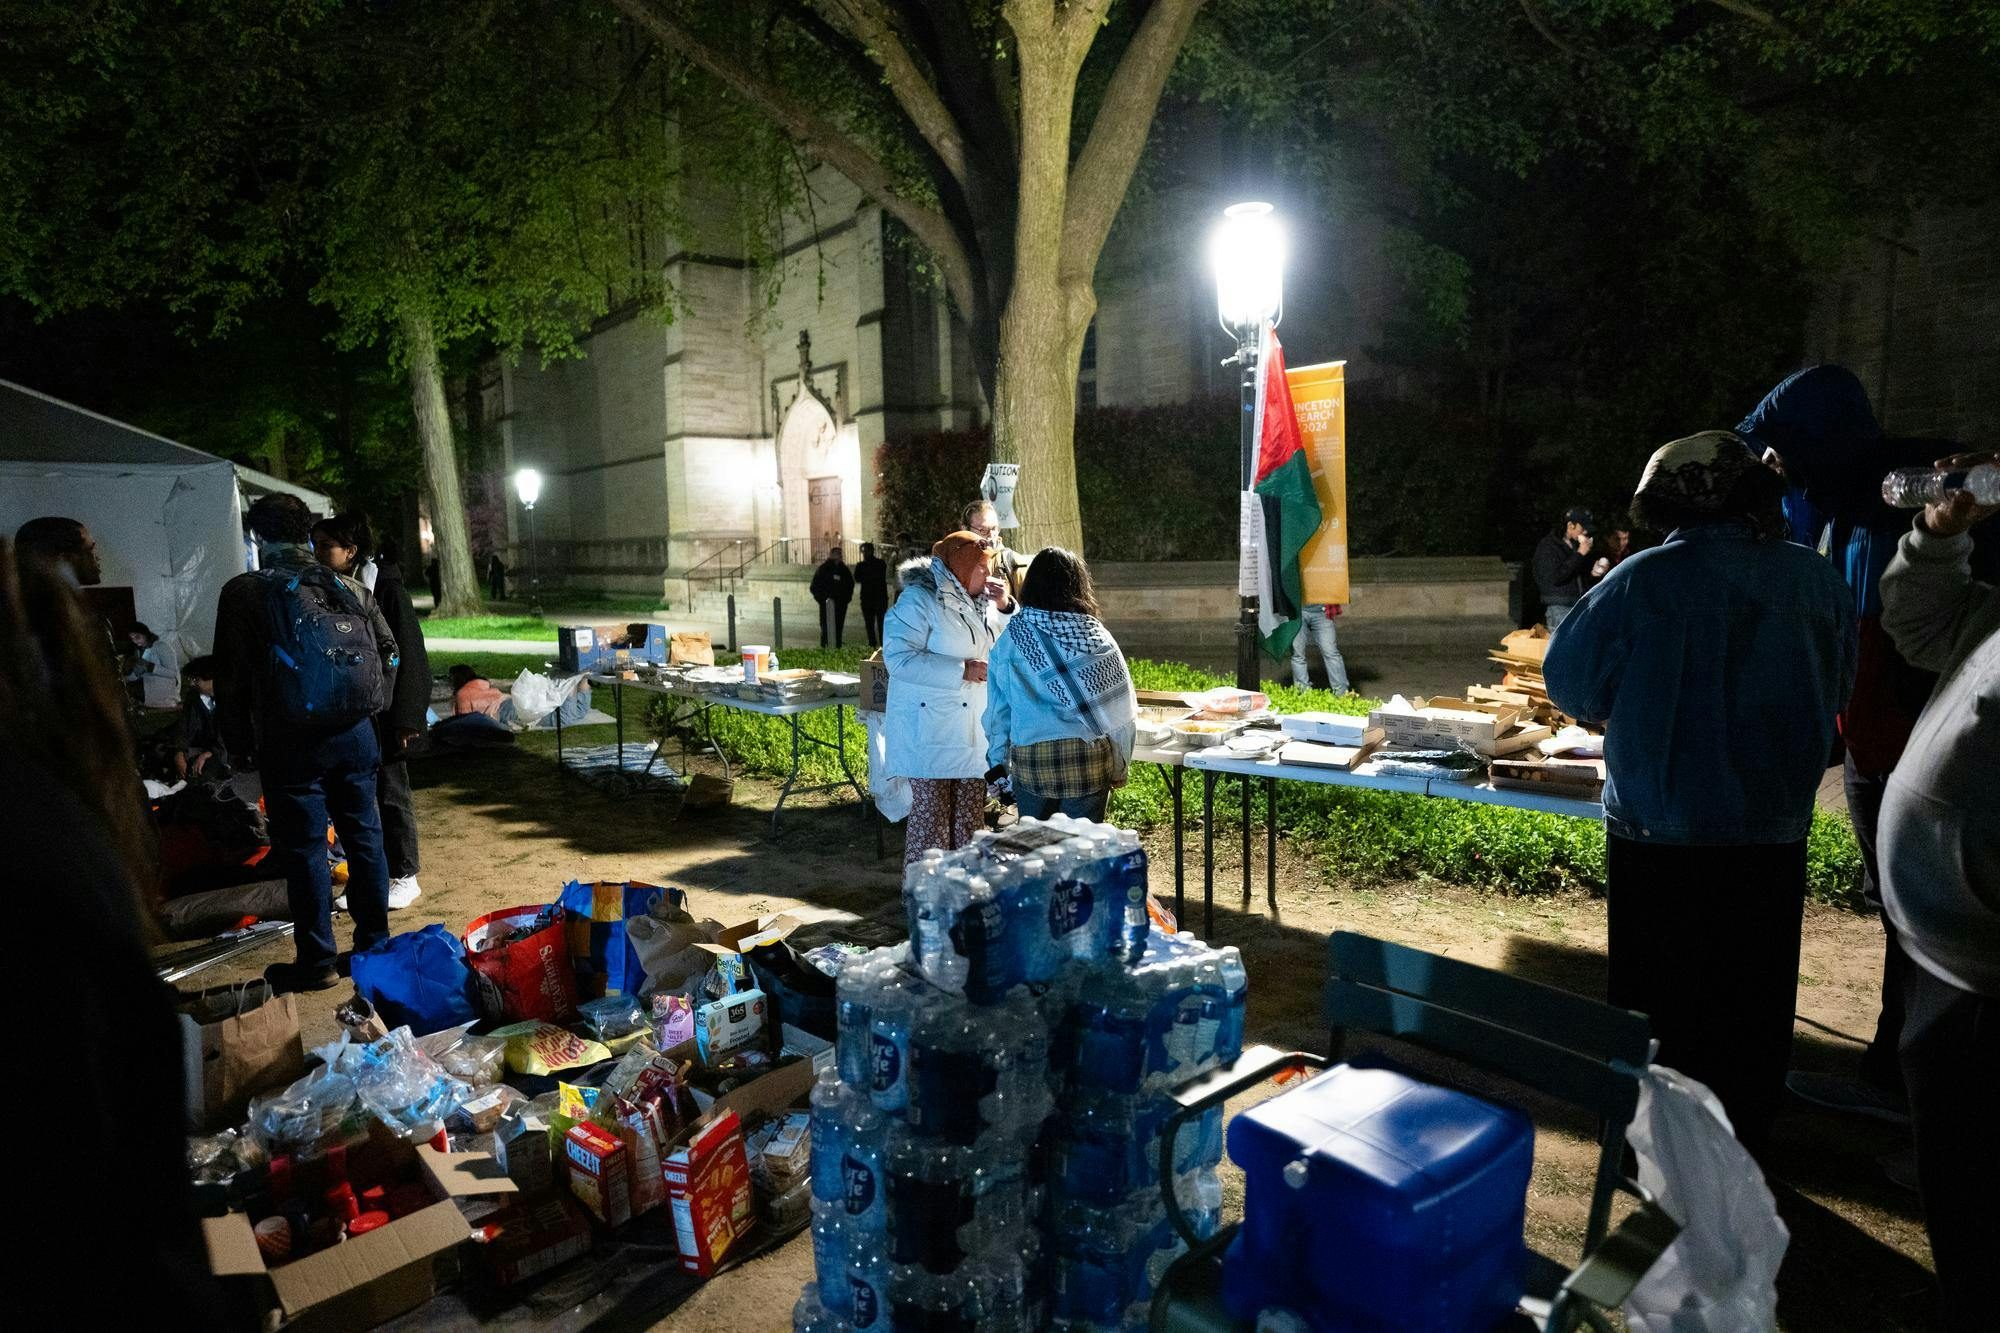 Piles of water bottles and food, two people stand under a light fixture in the center of the frame